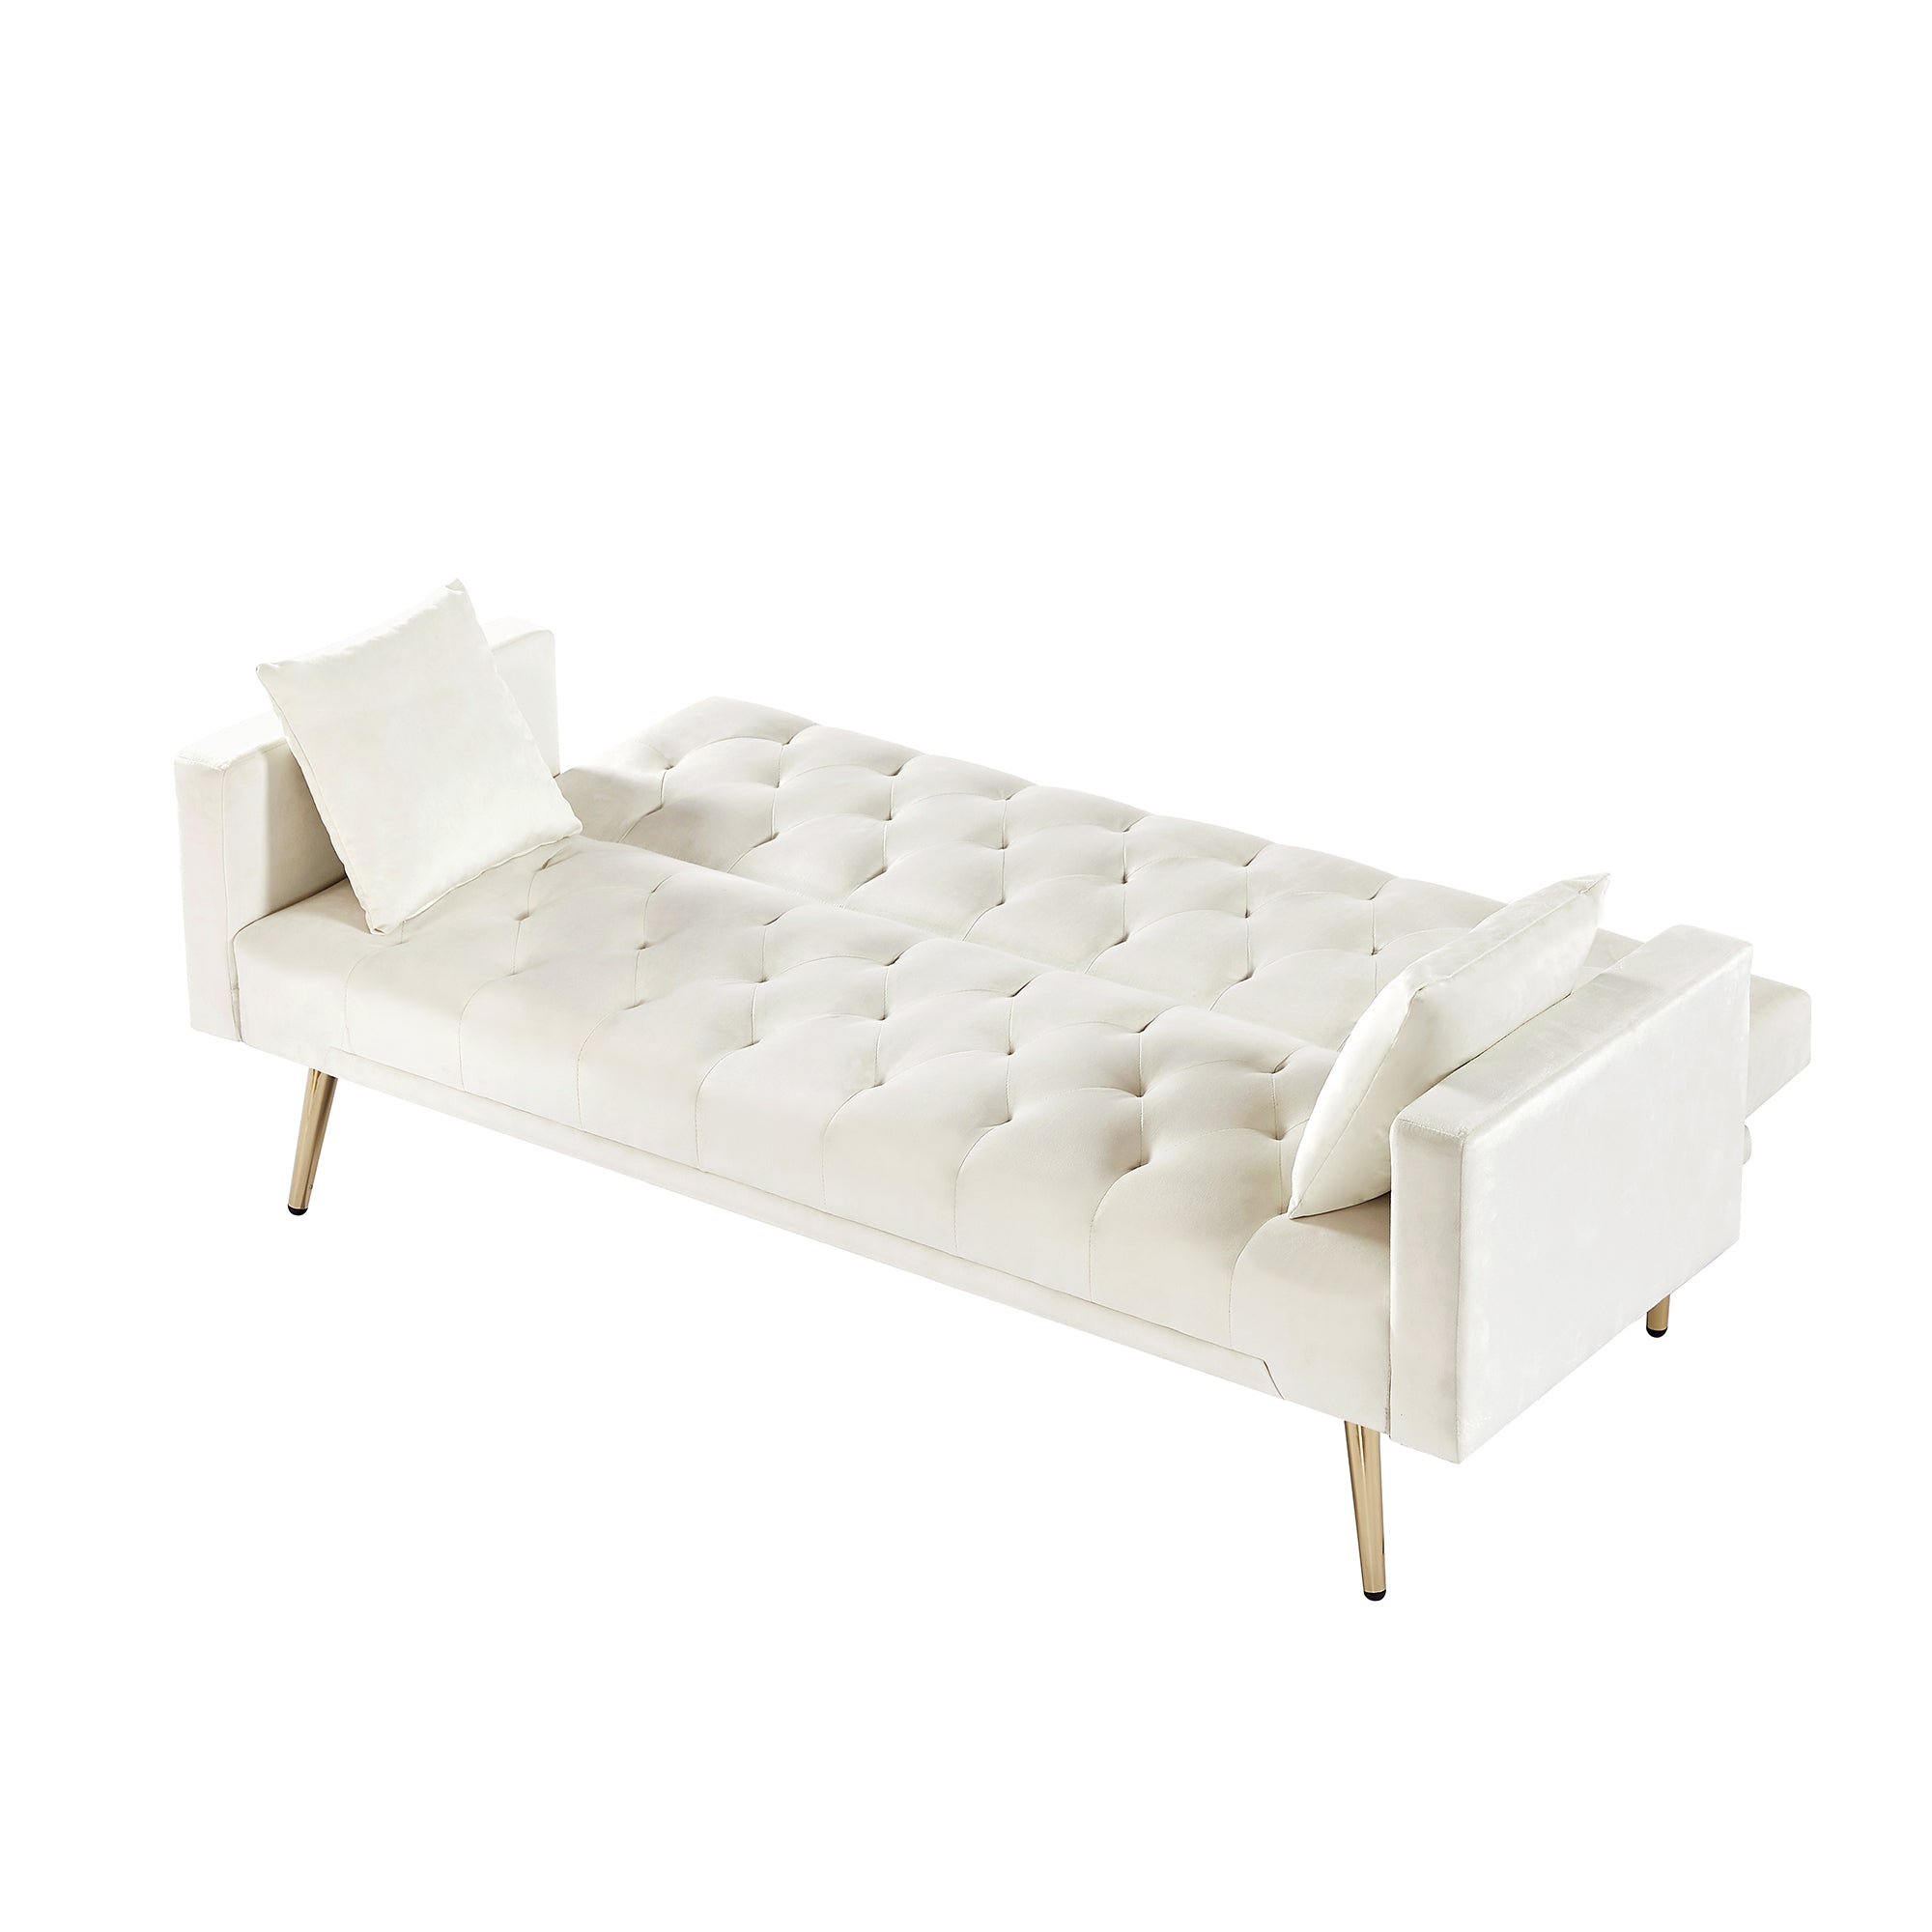 Convertible Folding Futon Sofa Bed, Sleeper Sofa Couch for Compact Living Space - Cream White